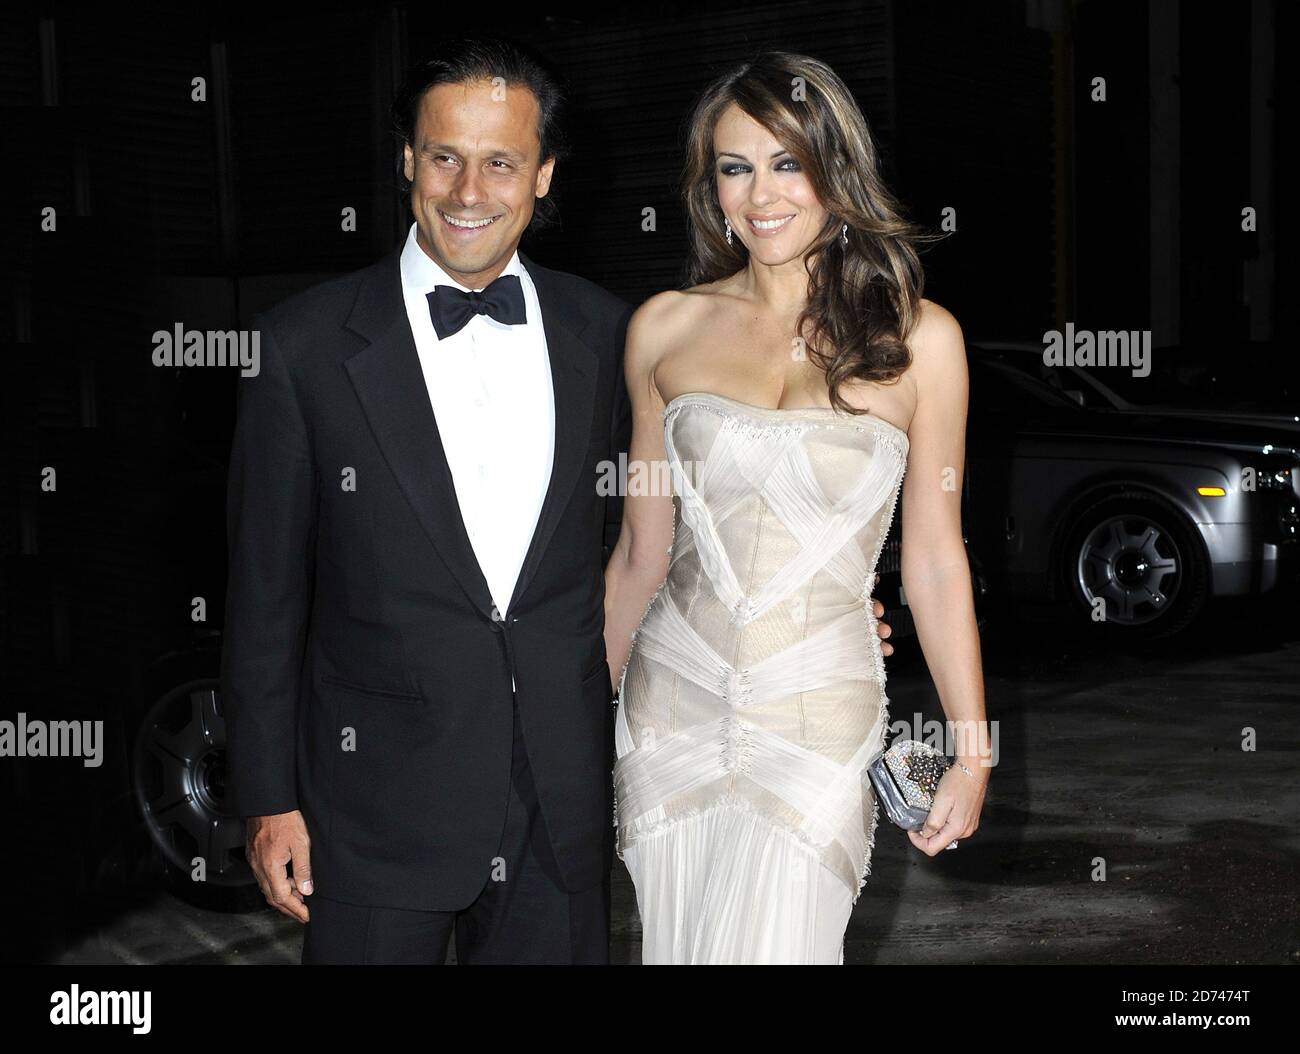 Elizabeth Hurley and Arun Nayar arrive at the Elton John AIDS Foundation Winter Ball, at Maison de Mode in Vauxhall, south London.  Stock Photo